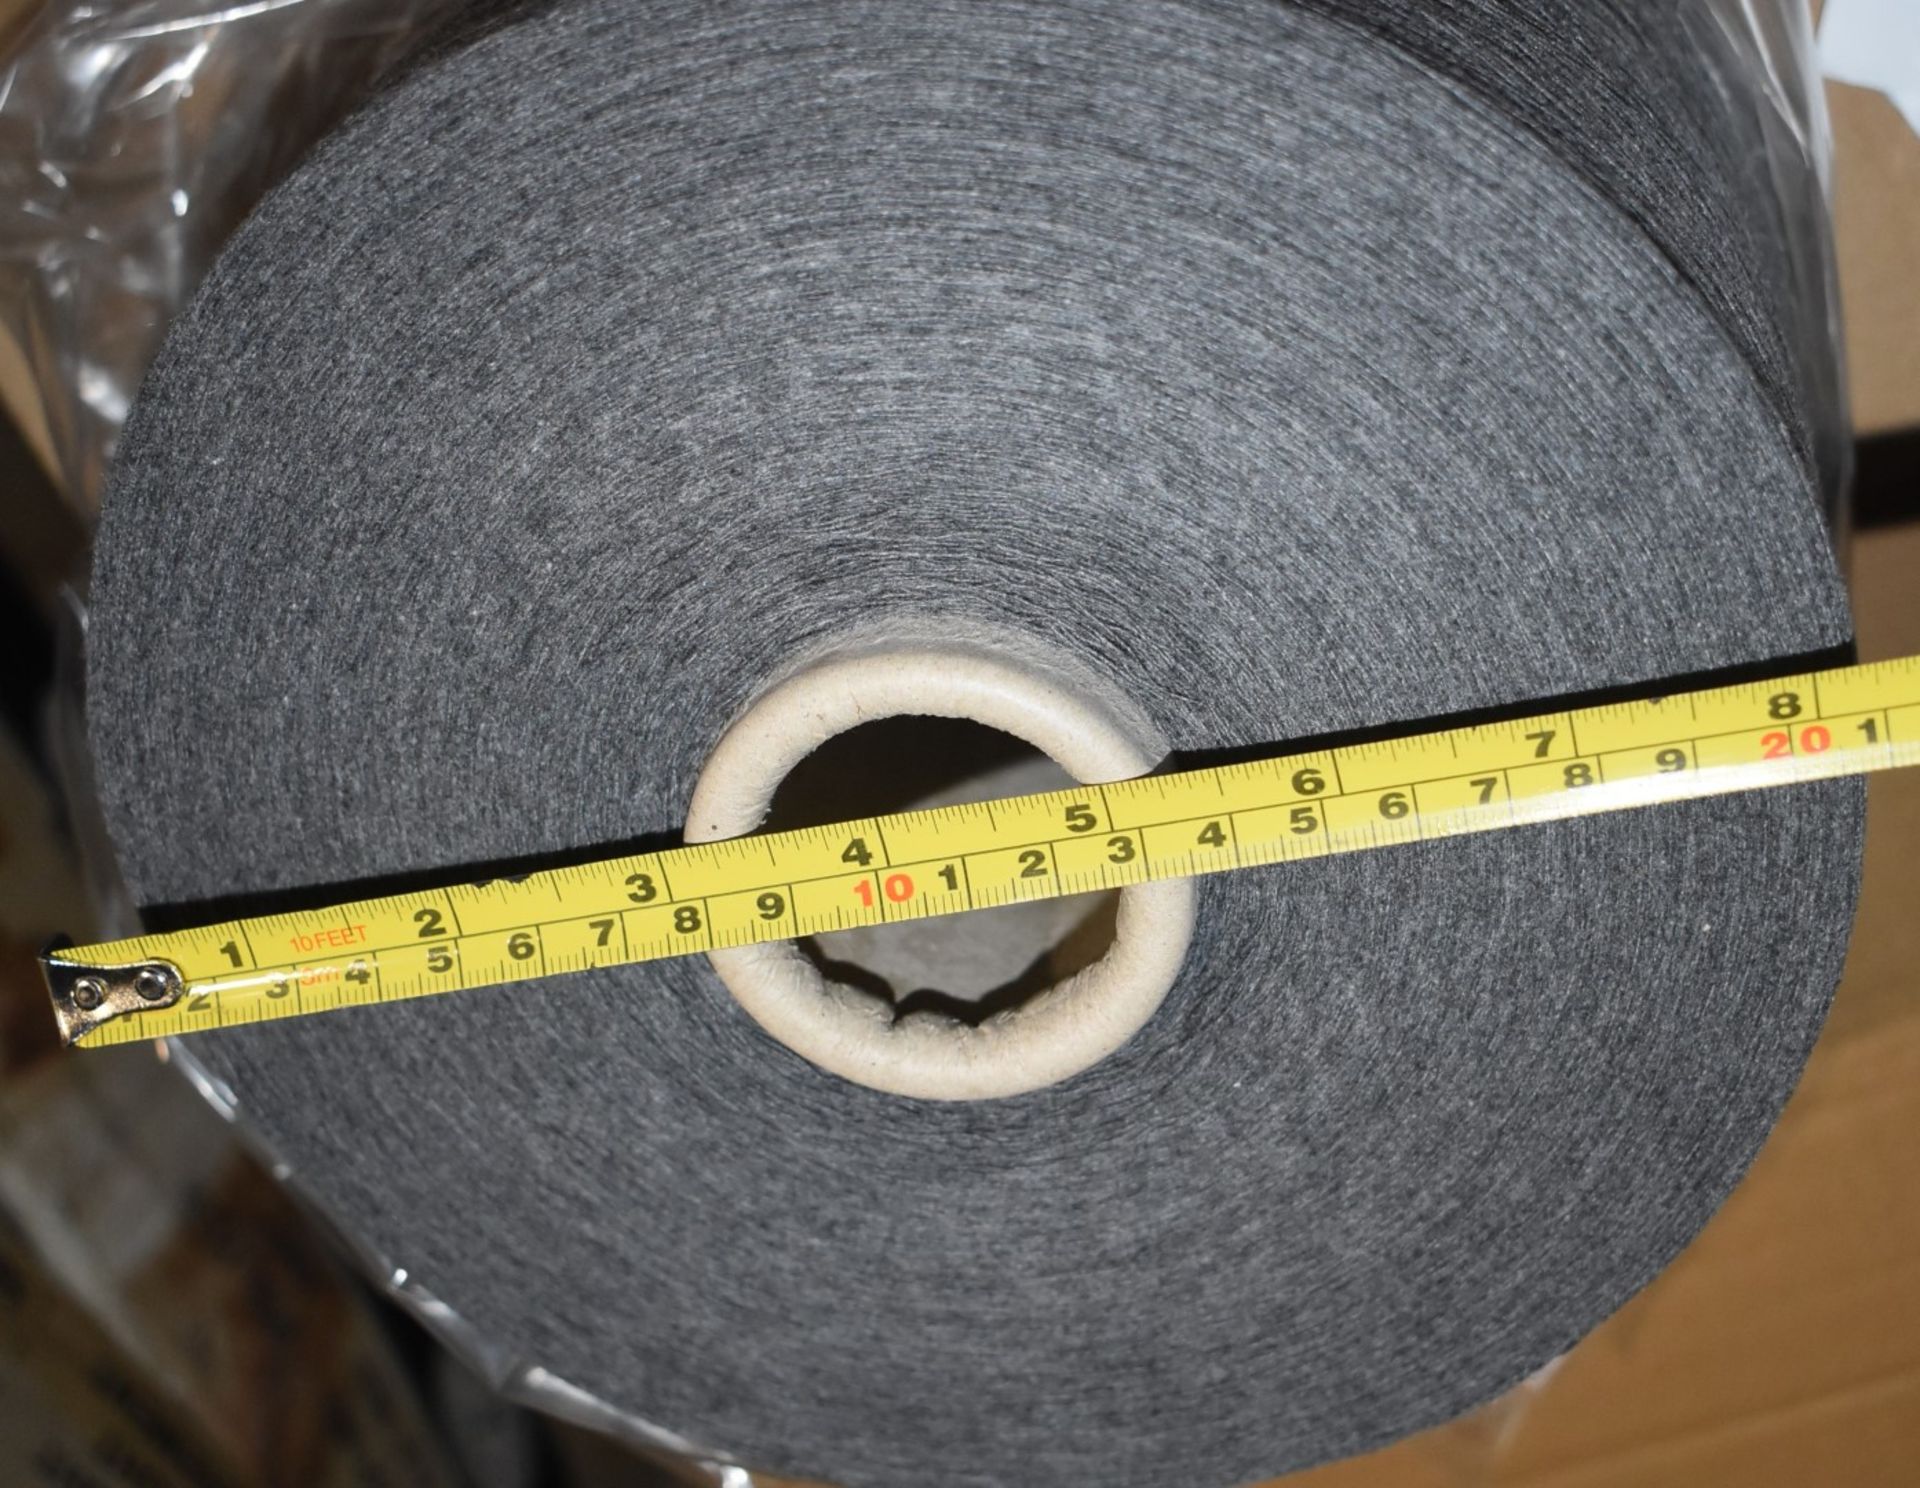 4 x Cones of 1/13 MicroCotton Knitting Yarn - Mid Grey - Approx Weight: 2,500g - New Stock ABL Yarn - Image 11 of 17